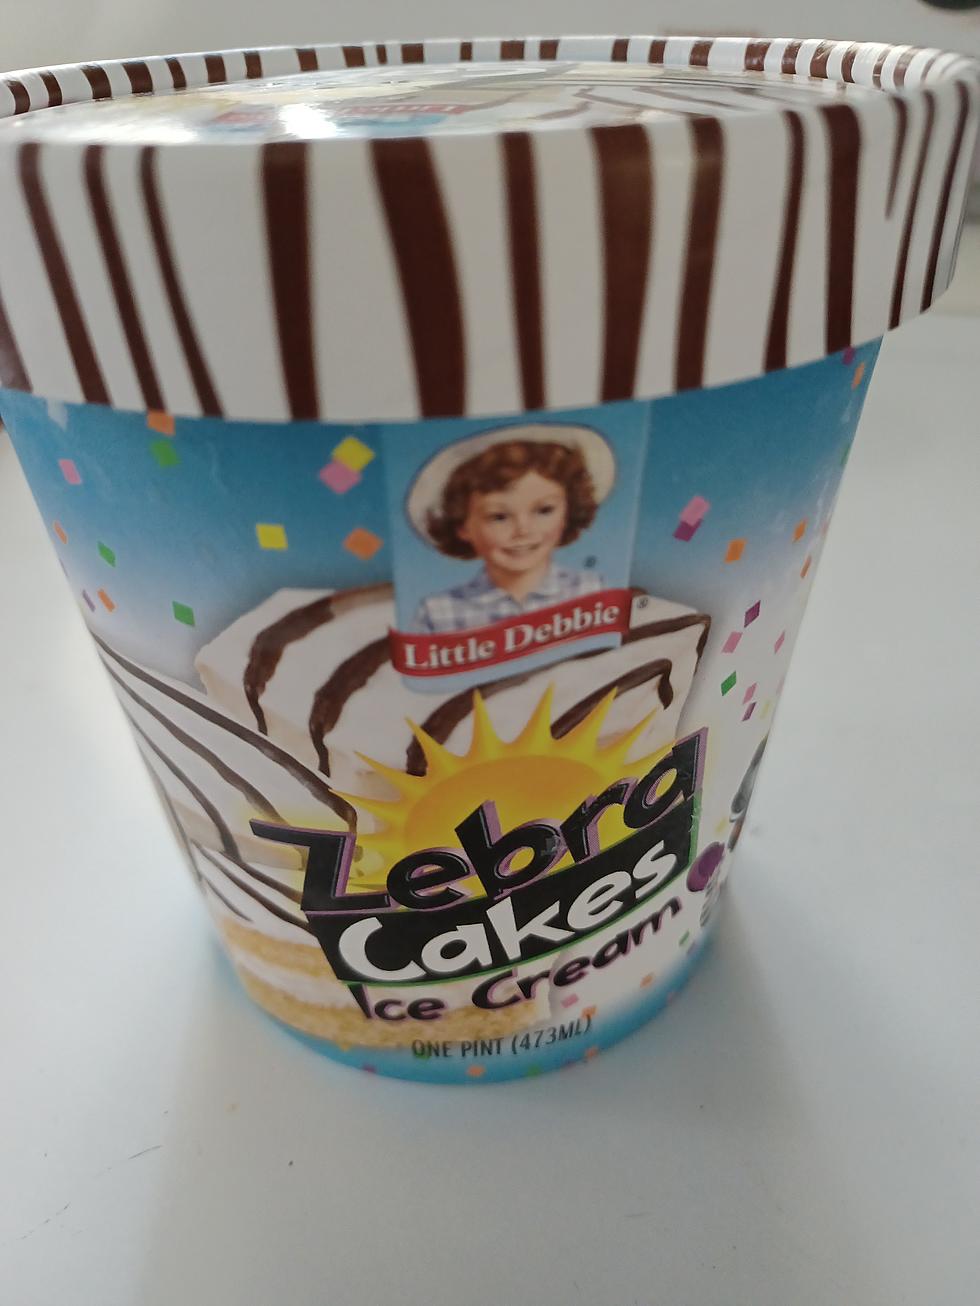 Disappointment Should Not Come In The Form Of Little Debbie Ice Cream